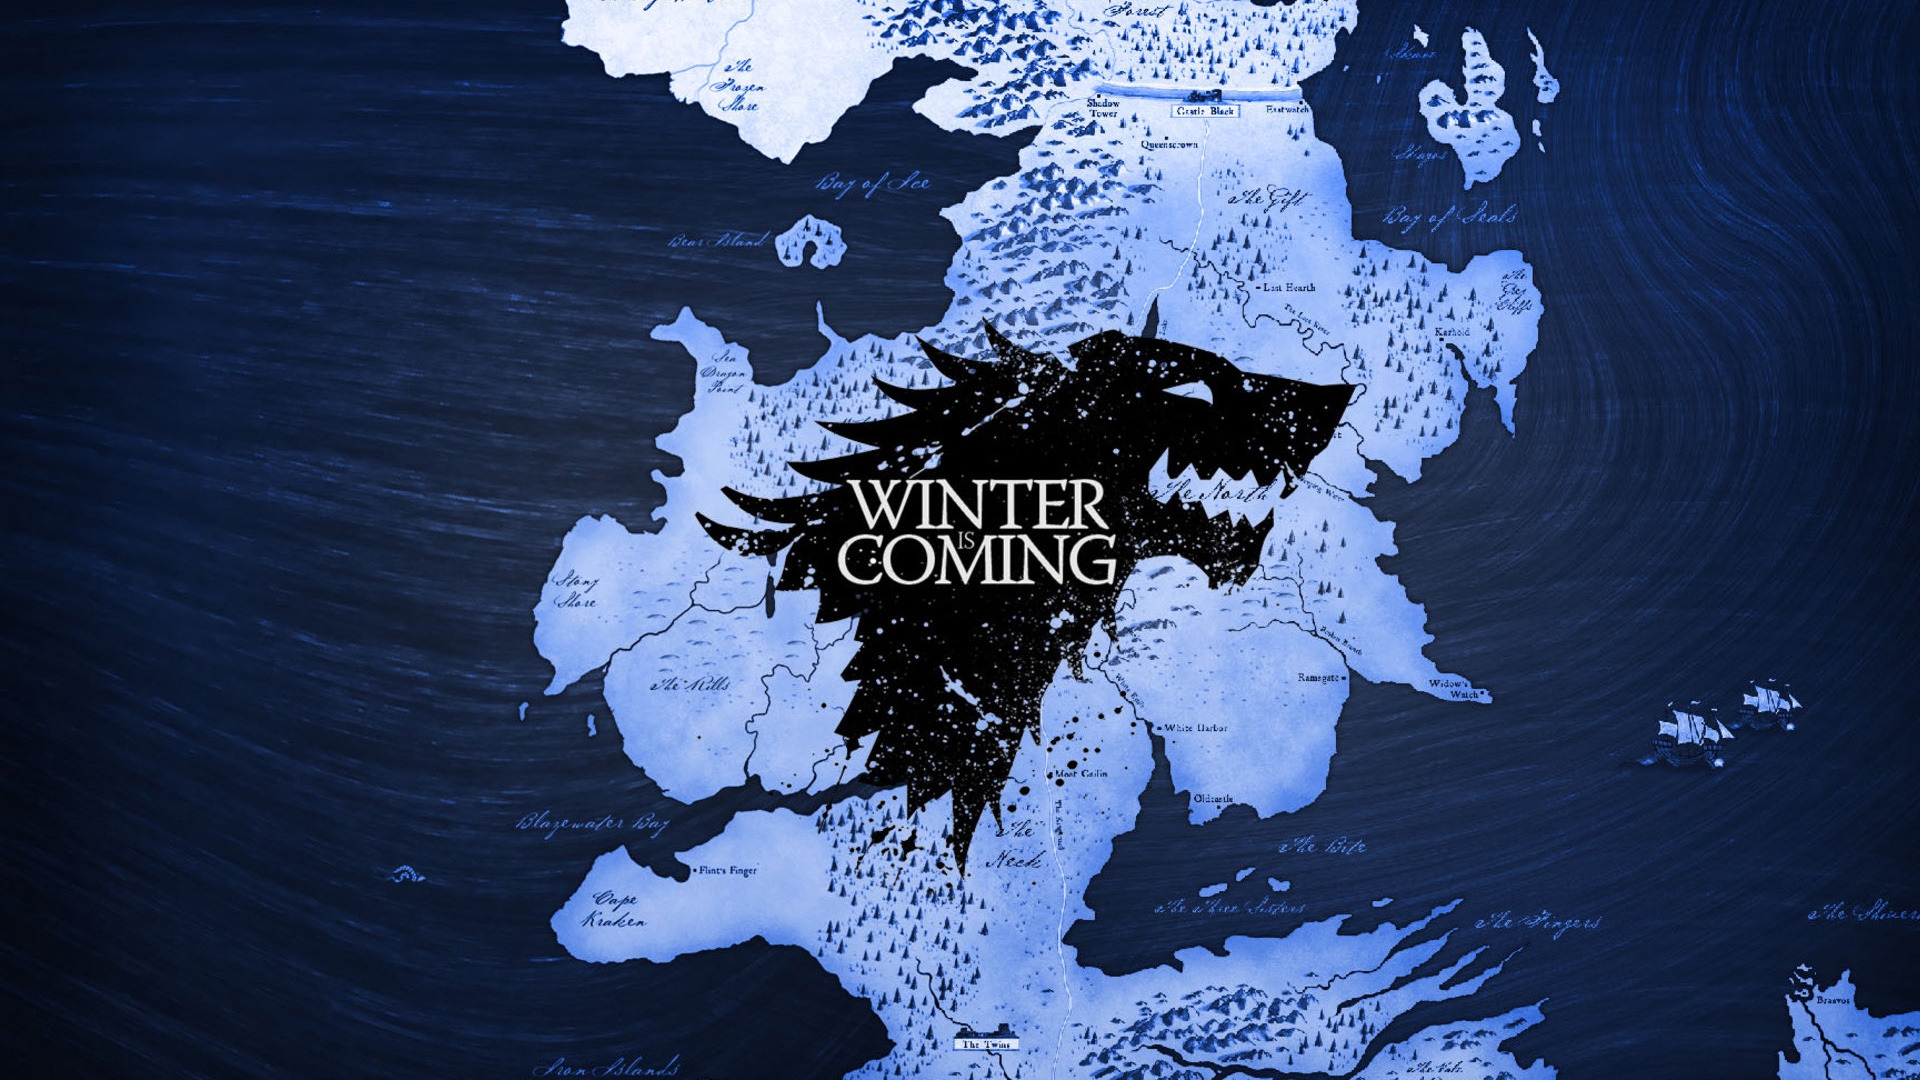 Game of Thrones Winter is Coming for 1920 x 1080 HDTV 1080p resolution